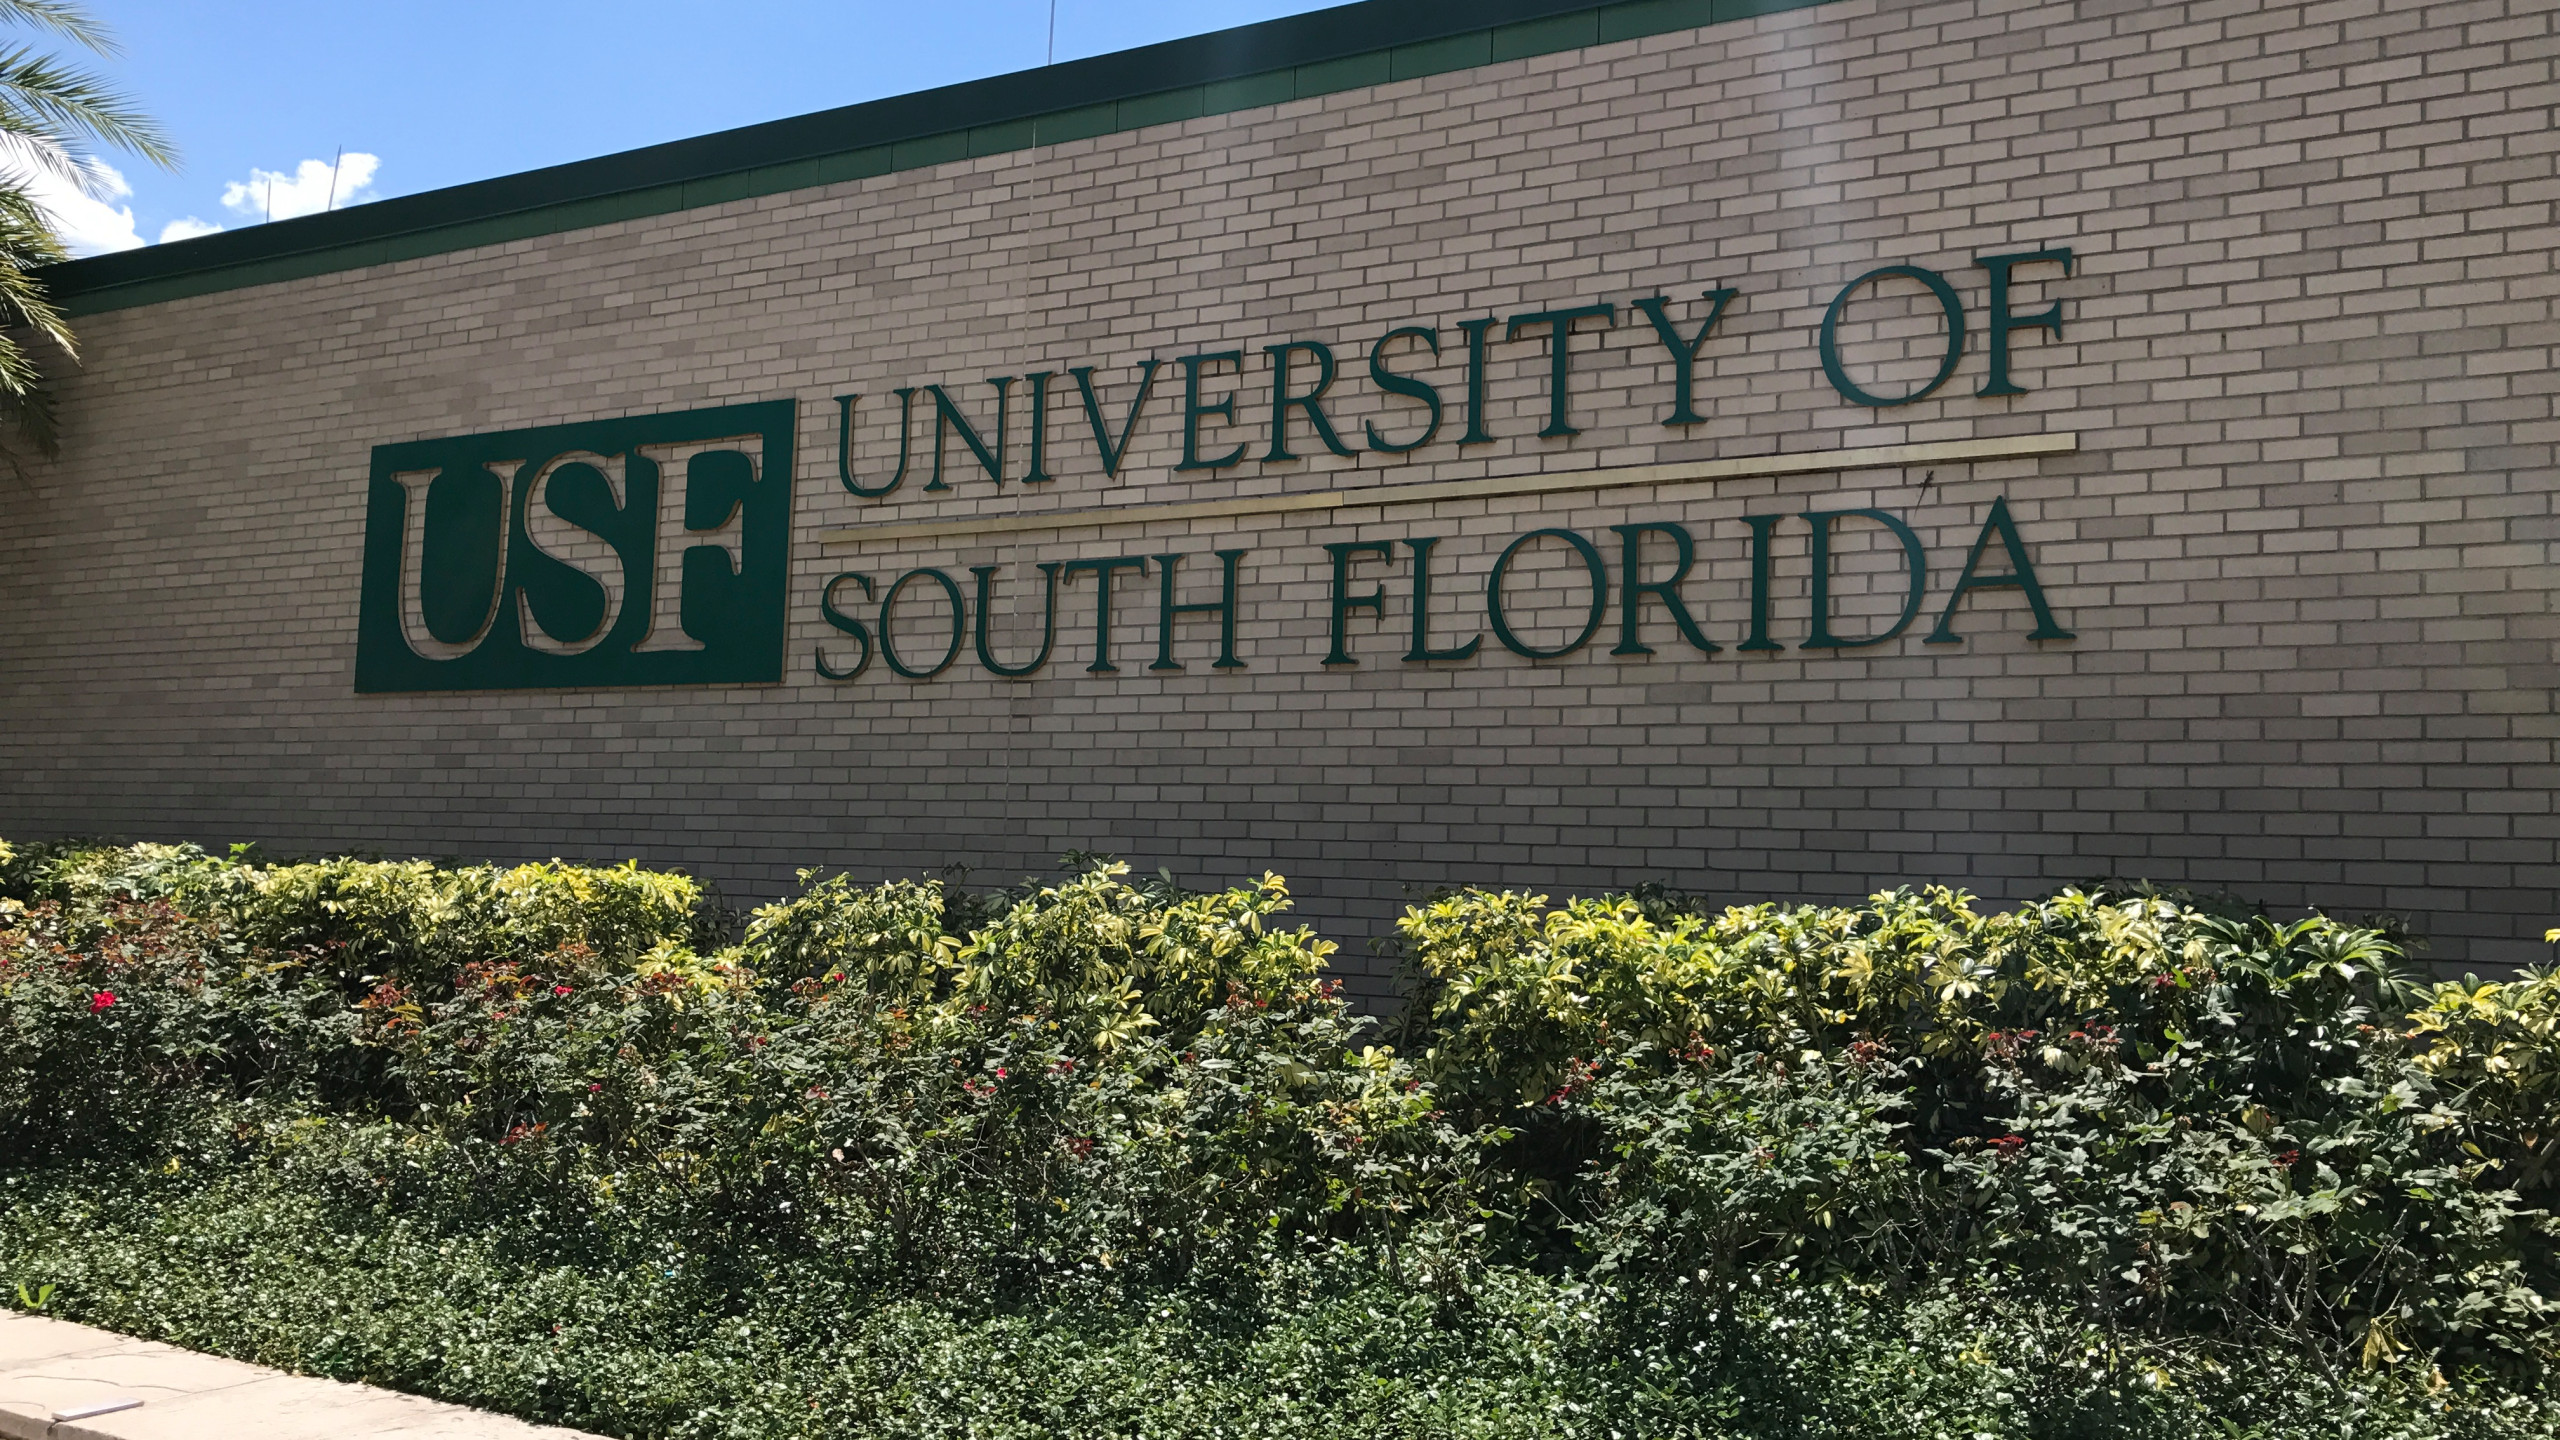 USF awaits federal guidance on how to spend additional $17.4 million in CARES Act funds